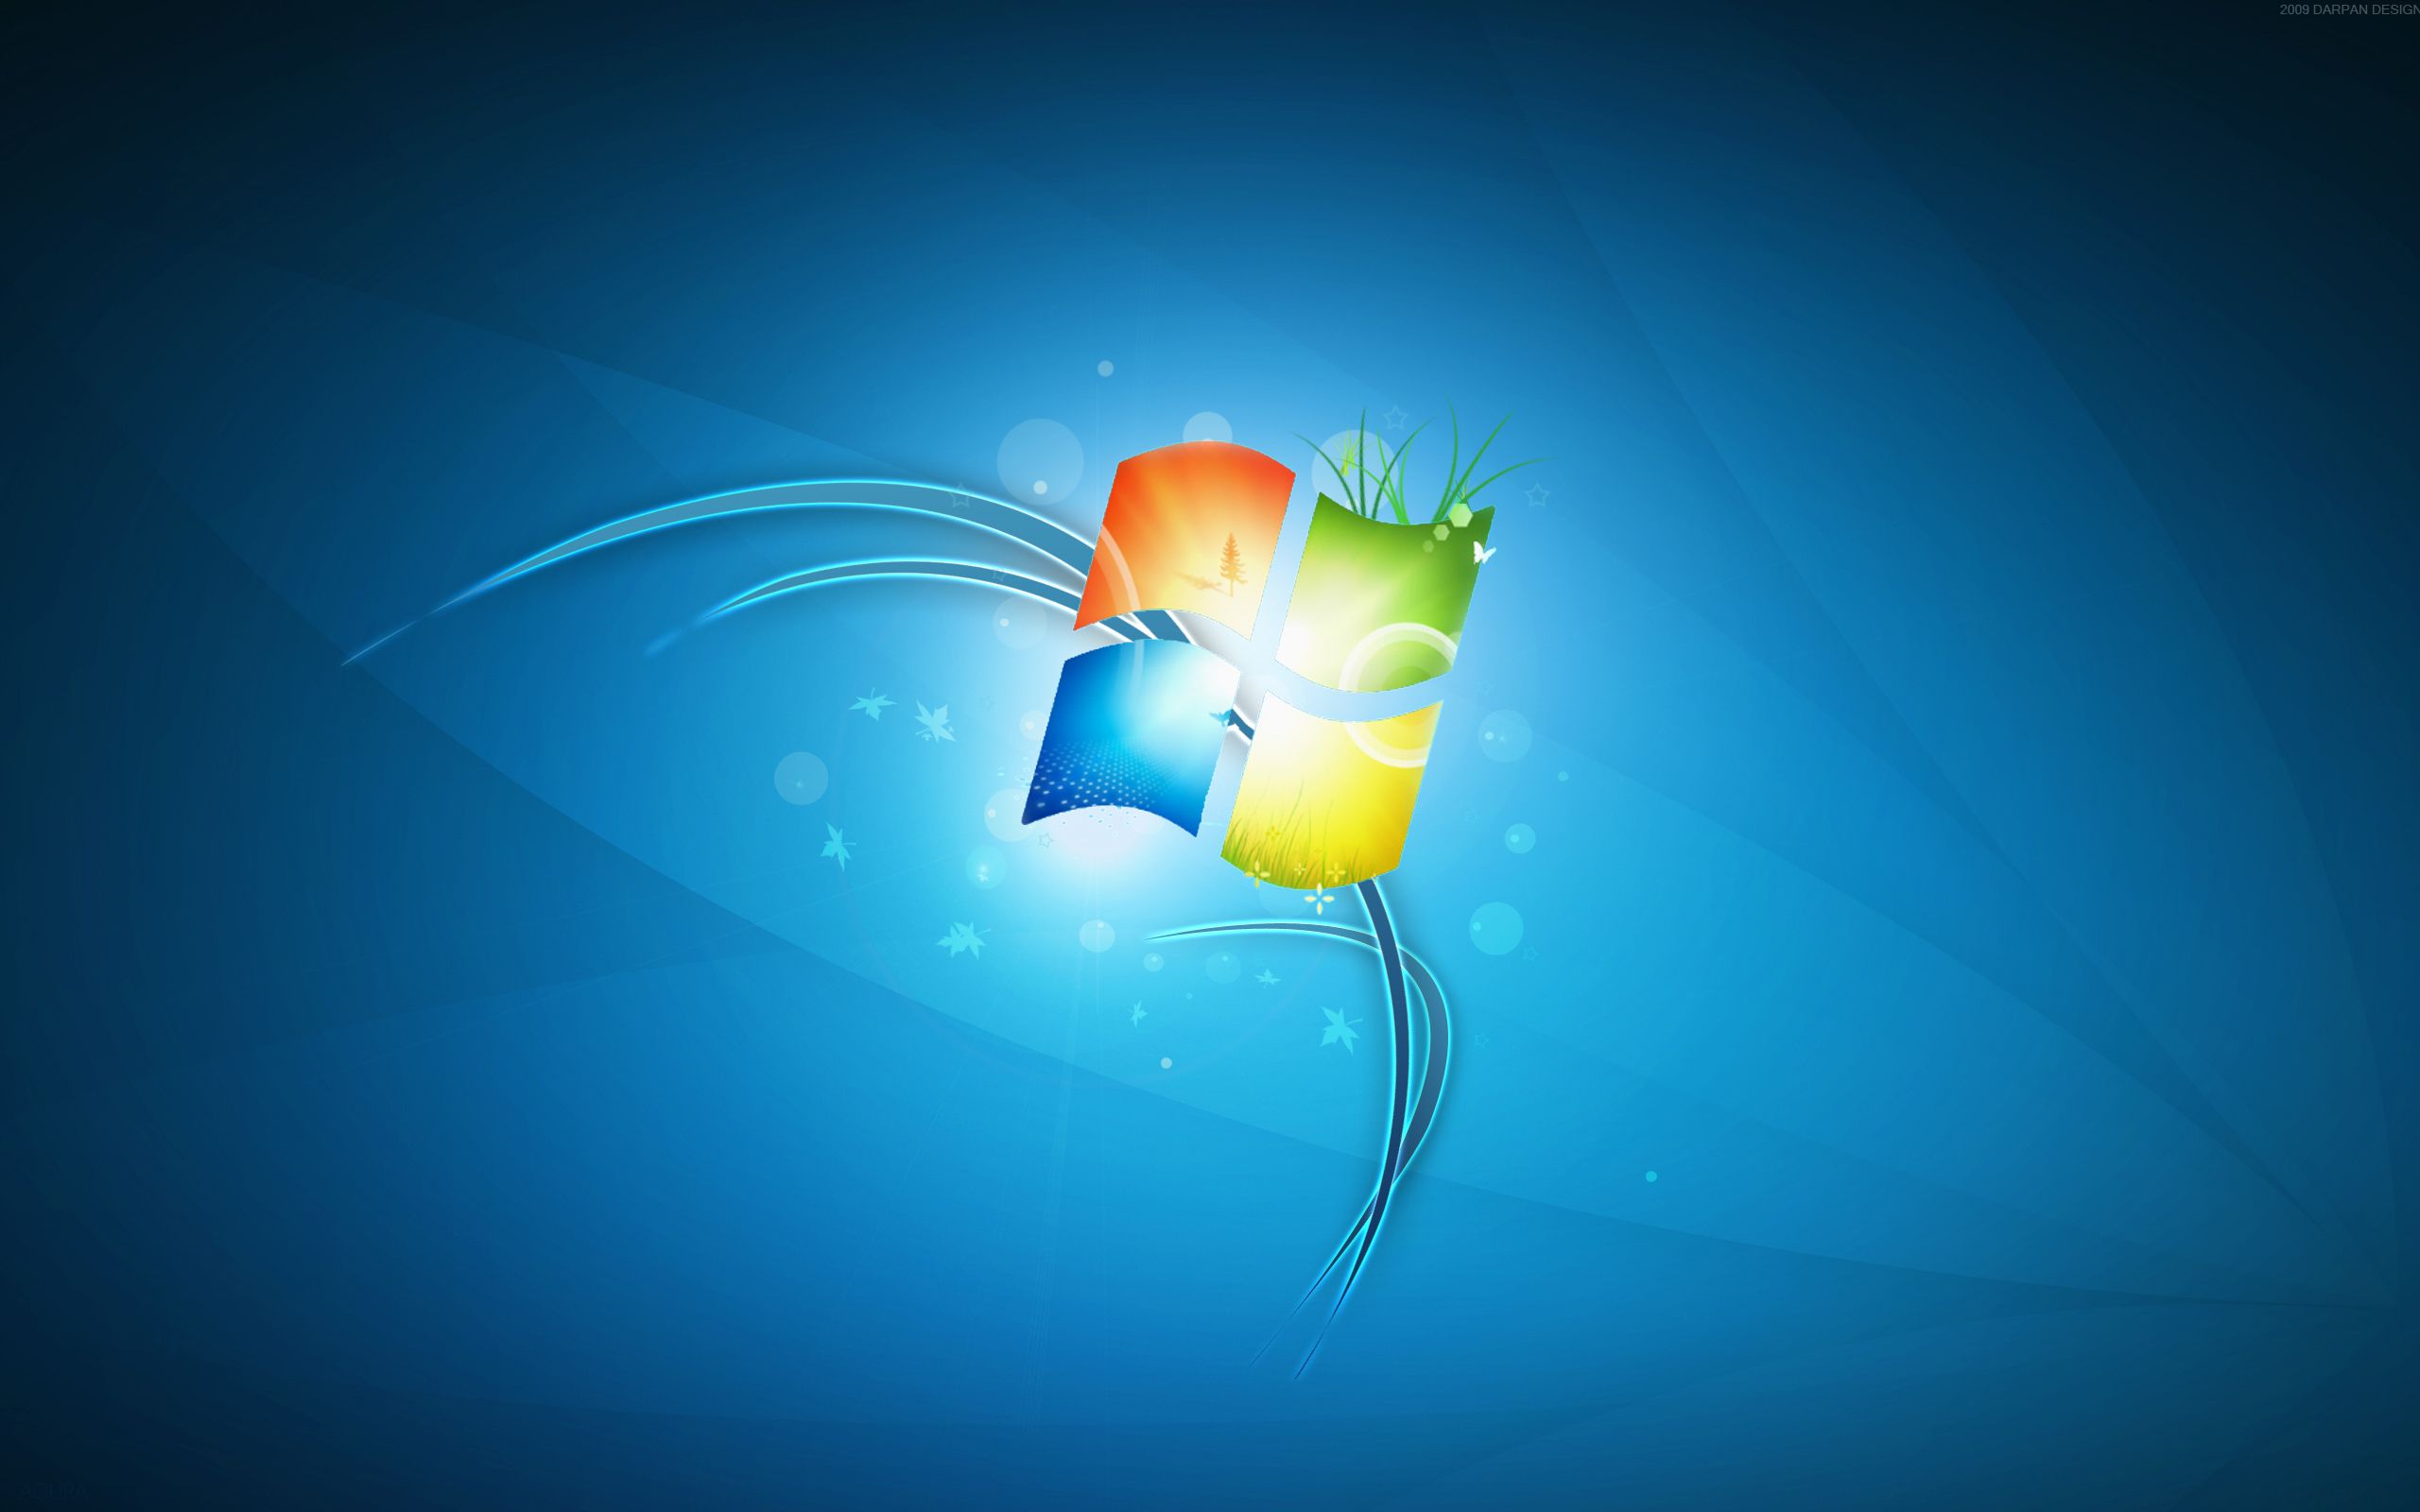 Awesome Windows 7 Wallpapers | web3mantra